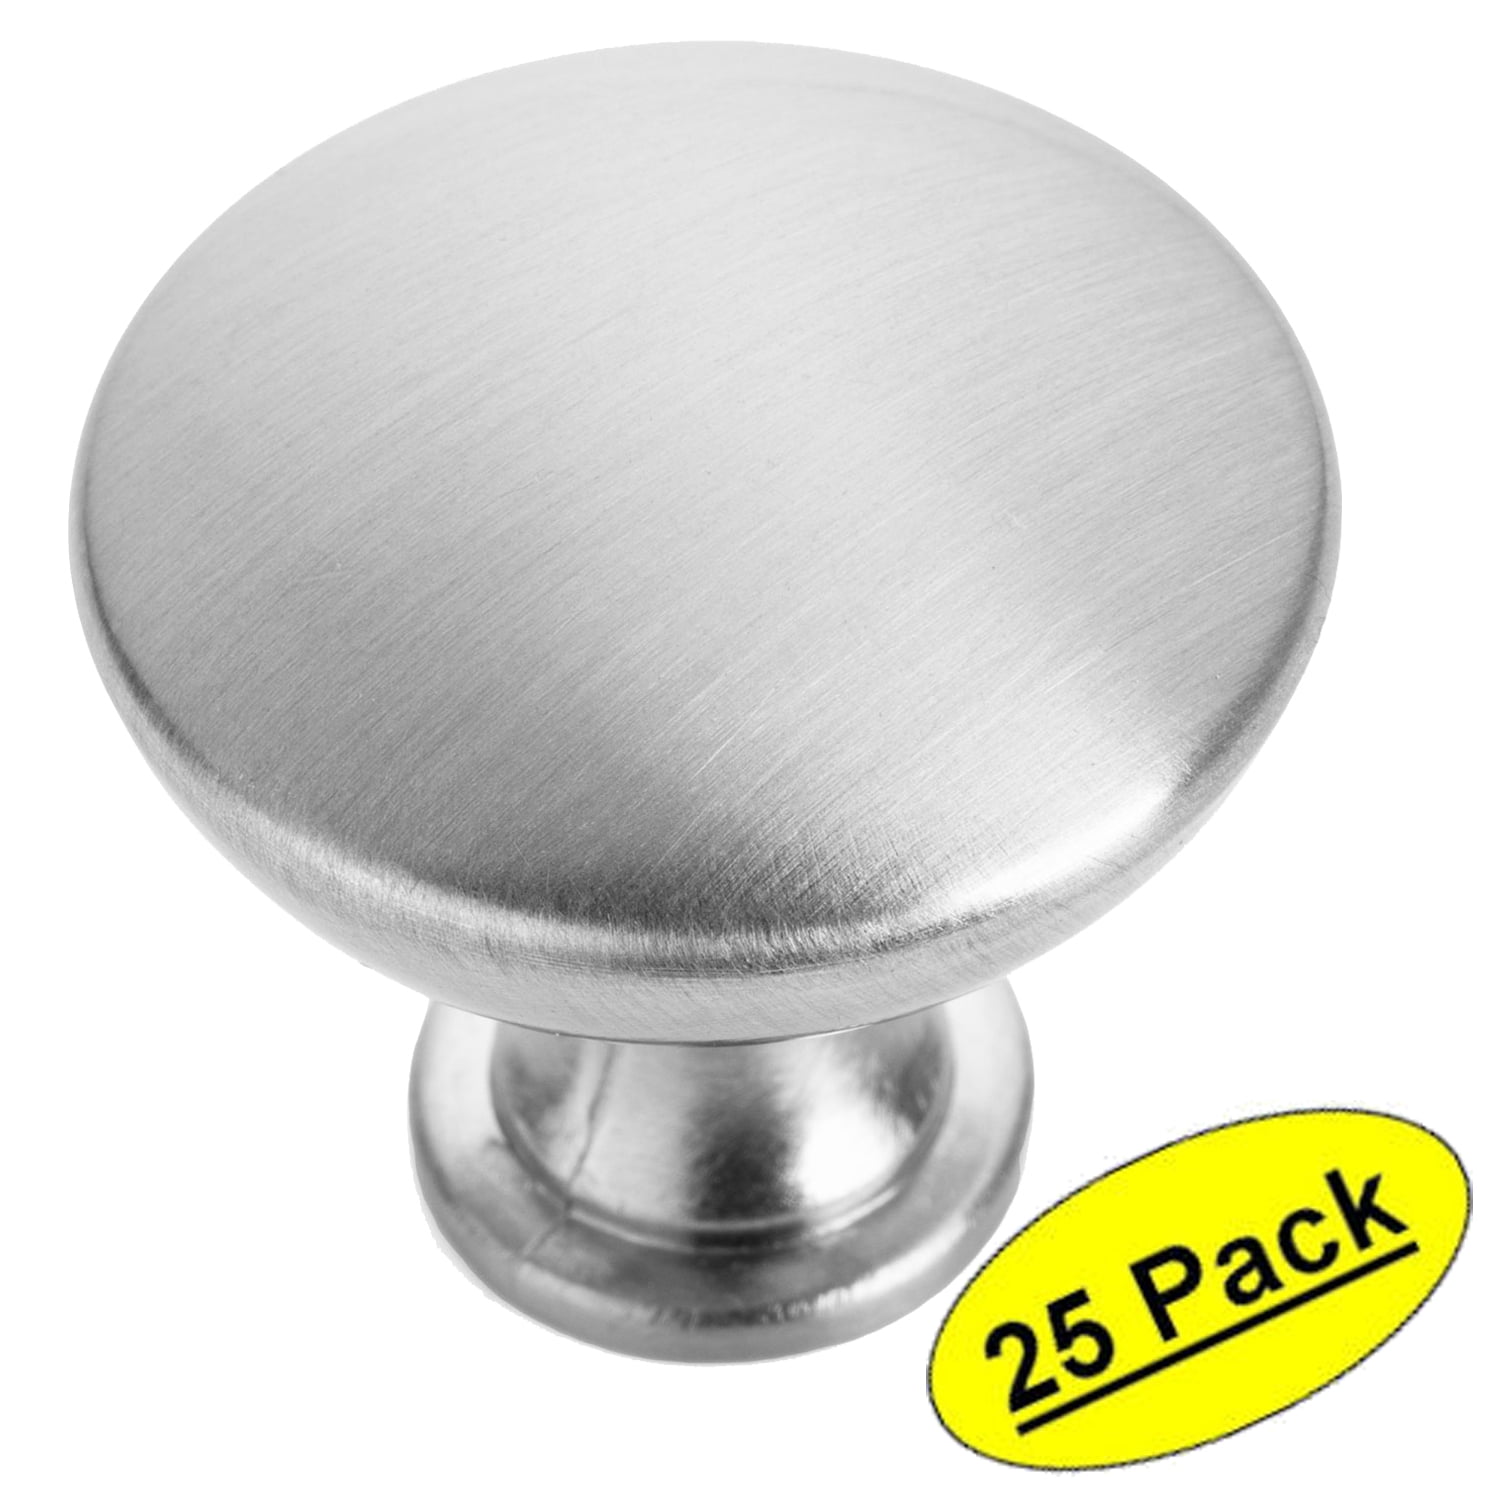 *10 Pack* Cosmas Cabinet Hardware Antique Silver Round Cabinet Knobs #6542AS 